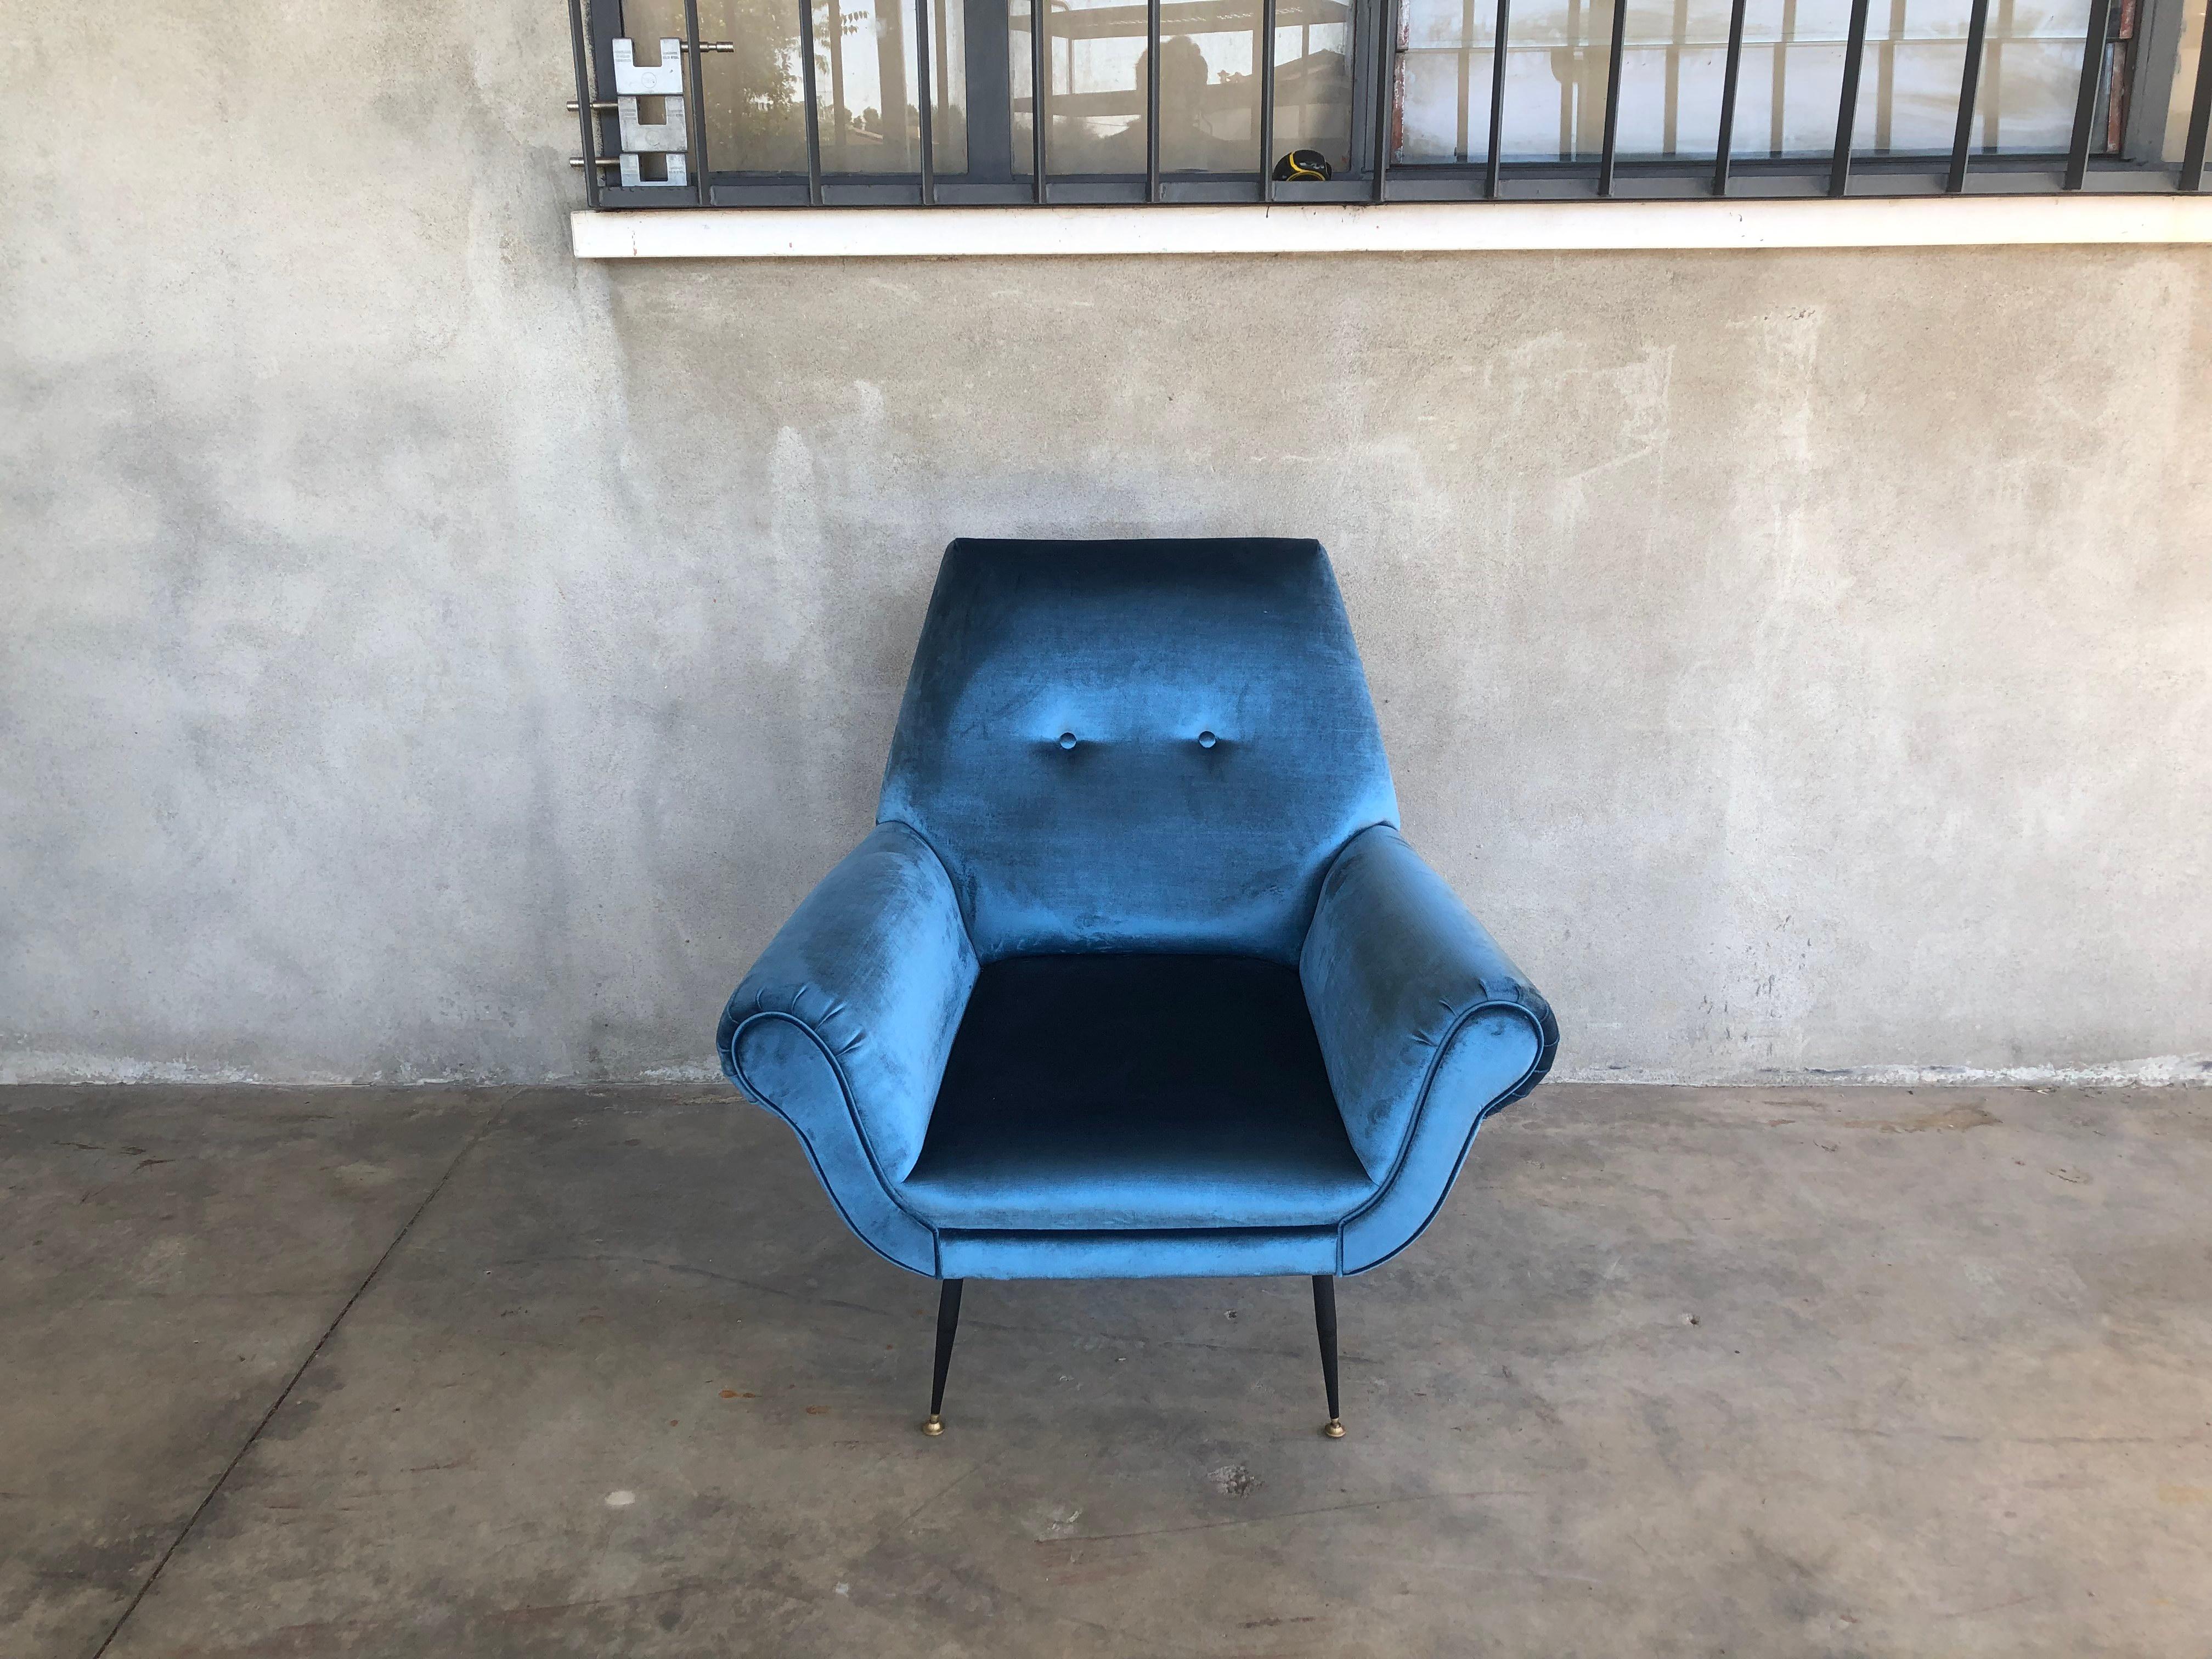 Pair of armchairs designed by Radice, Italy, 1950s. Re-upholstered in electric blue velvet.
Metal legs with brass ending. Excellent conditions.
Size: 84 x 64 x H 90 cm - 33.07